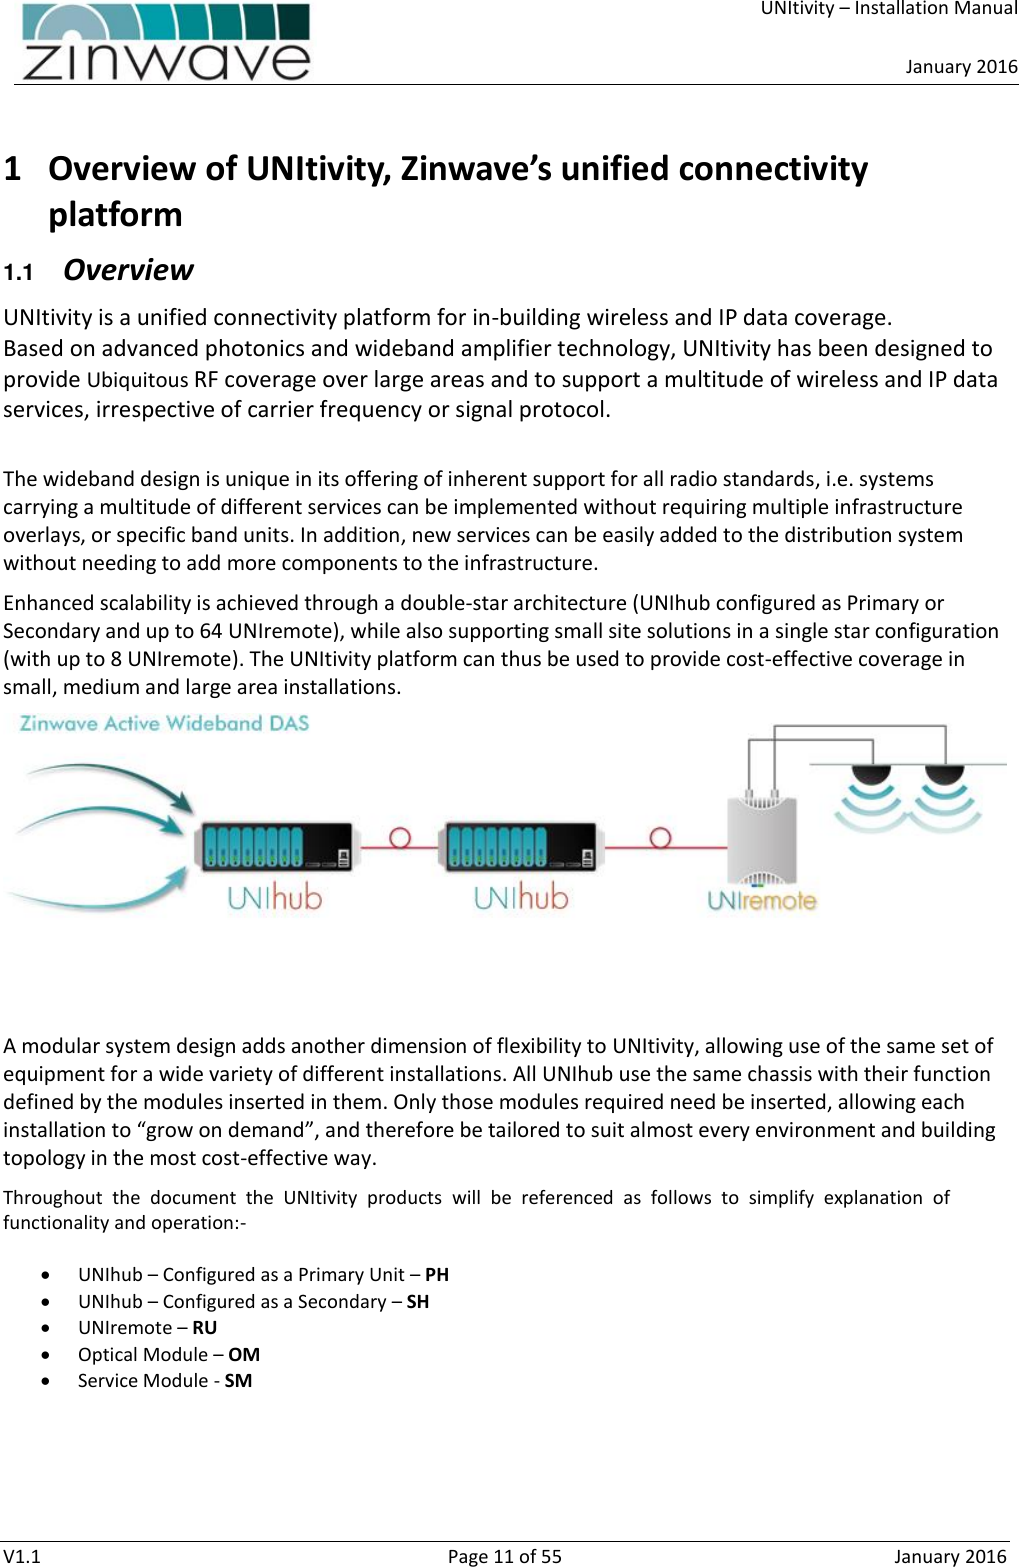     UNItivity – Installation Manual      January 2016  V1.1  Page 11 of 55  January 2016  1 Overview of UNItivity, Zinwave’s unified connectivity platform  1.1  Overview UNItivity is a unified connectivity platform for in-building wireless and IP data coverage. Based on advanced photonics and wideband amplifier technology, UNItivity has been designed to provide Ubiquitous RF coverage over large areas and to support a multitude of wireless and IP data services, irrespective of carrier frequency or signal protocol.   The wideband design is unique in its offering of inherent support for all radio standards, i.e. systems carrying a multitude of different services can be implemented without requiring multiple infrastructure overlays, or specific band units. In addition, new services can be easily added to the distribution system without needing to add more components to the infrastructure. Enhanced scalability is achieved through a double-star architecture (UNIhub configured as Primary or Secondary and up to 64 UNIremote), while also supporting small site solutions in a single star configuration (with up to 8 UNIremote). The UNItivity platform can thus be used to provide cost-effective coverage in small, medium and large area installations.    A modular system design adds another dimension of flexibility to UNItivity, allowing use of the same set of equipment for a wide variety of different installations. All UNIhub use the same chassis with their function defined by the modules inserted in them. Only those modules required need be inserted, allowing each installation to “grow on demand”, and therefore be tailored to suit almost every environment and building topology in the most cost-effective way. Throughout  the  document  the  UNItivity  products  will  be  referenced  as  follows  to  simplify  explanation  of functionality and operation:-   UNIhub – Configured as a Primary Unit – PH  UNIhub – Configured as a Secondary – SH  UNIremote – RU  Optical Module – OM  Service Module - SM     